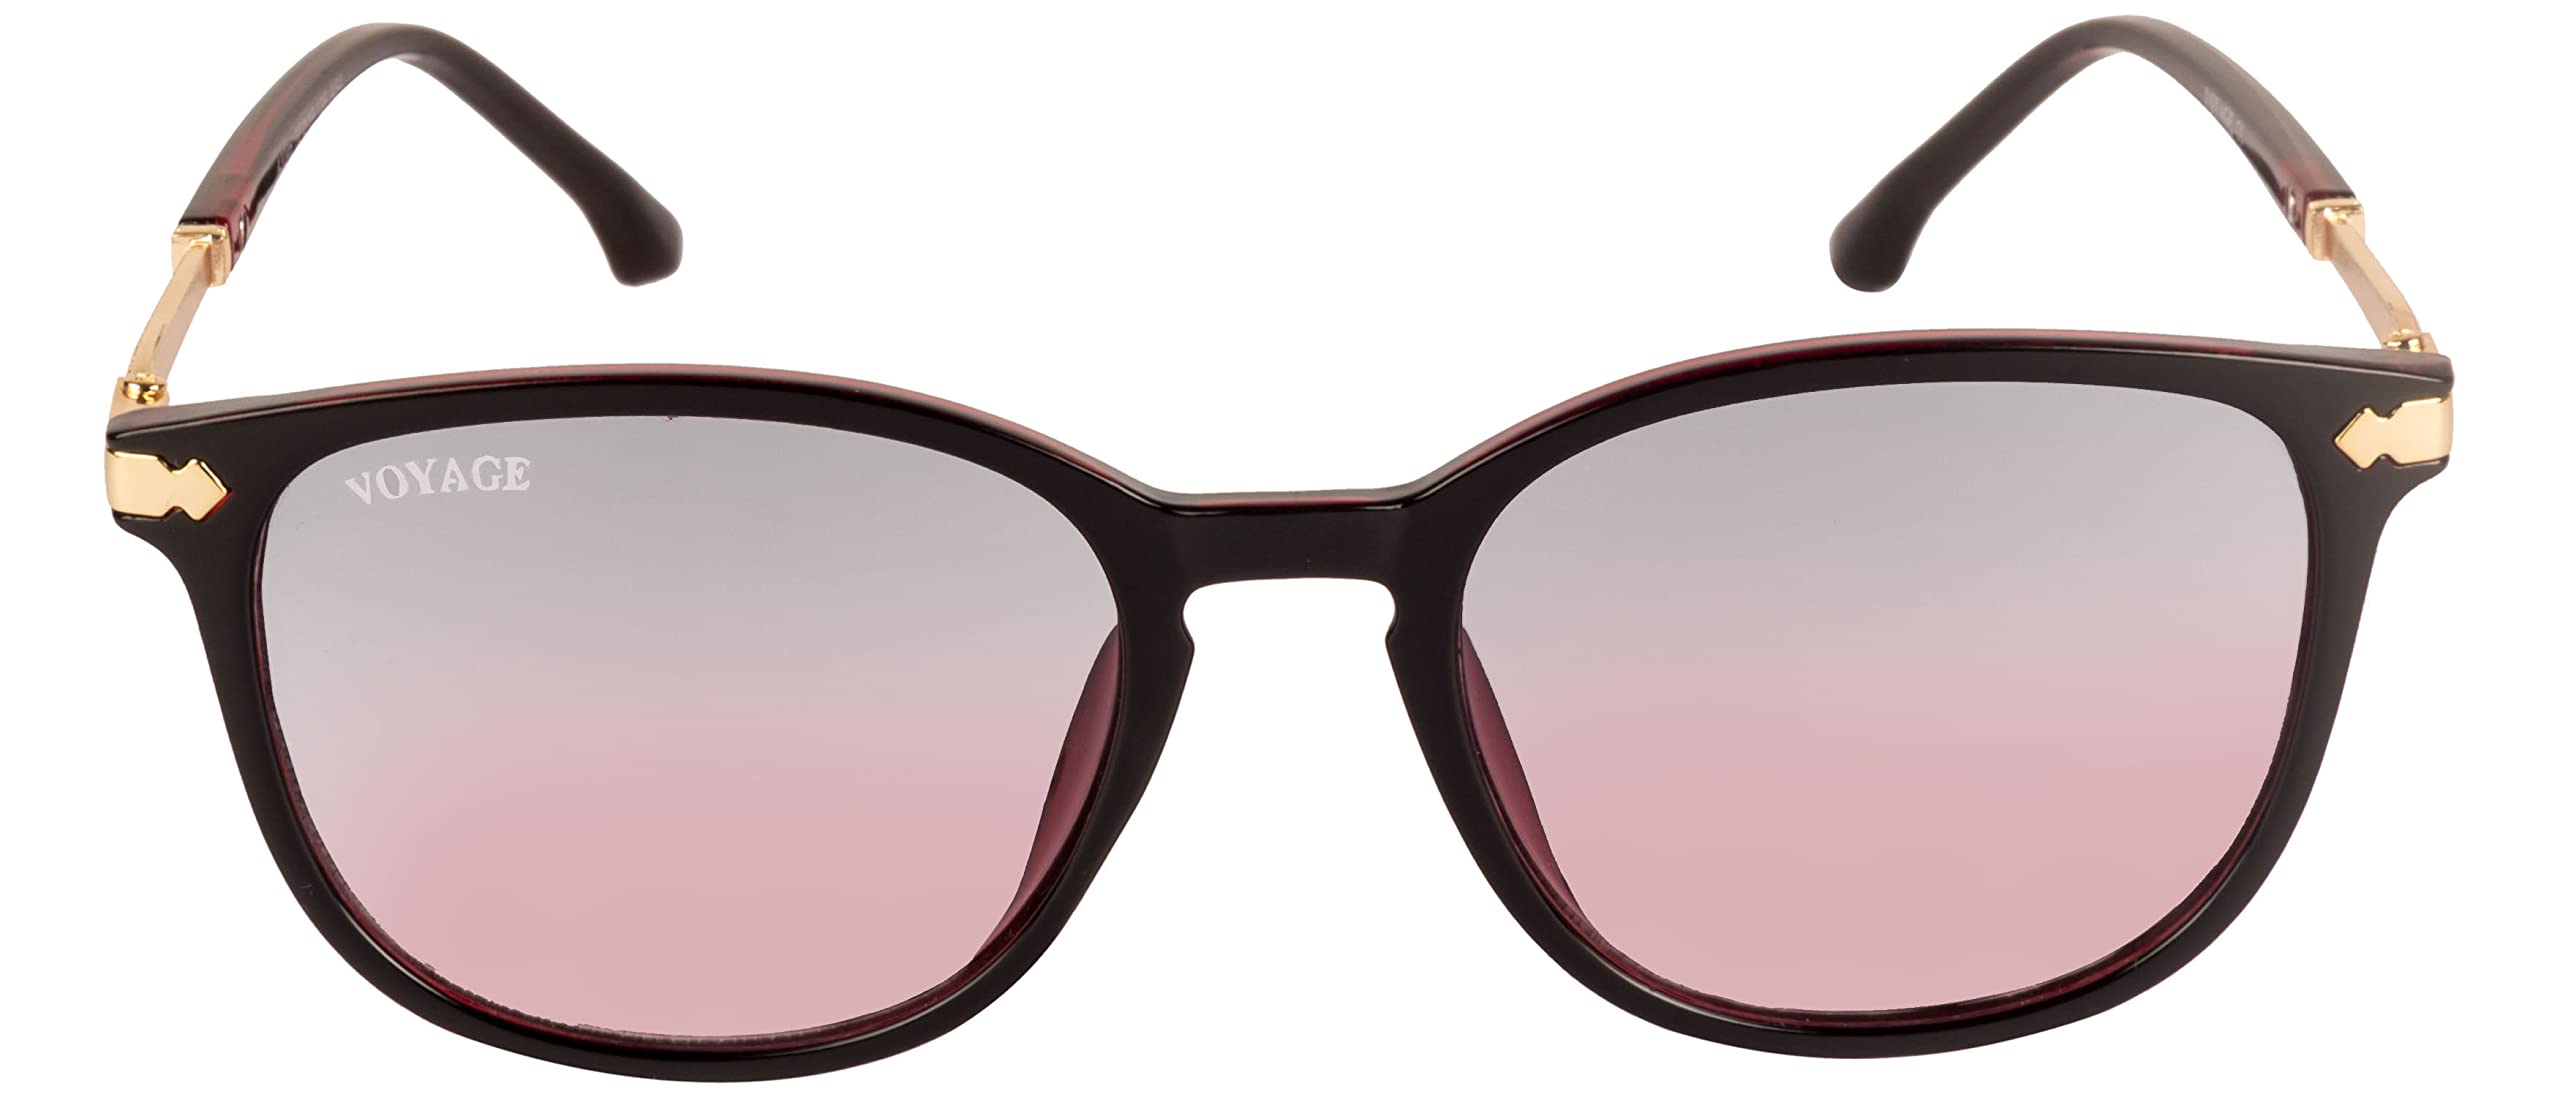 Voyage - Buy Voyage Sunglasses & Frames for Women Online in India | Myntra